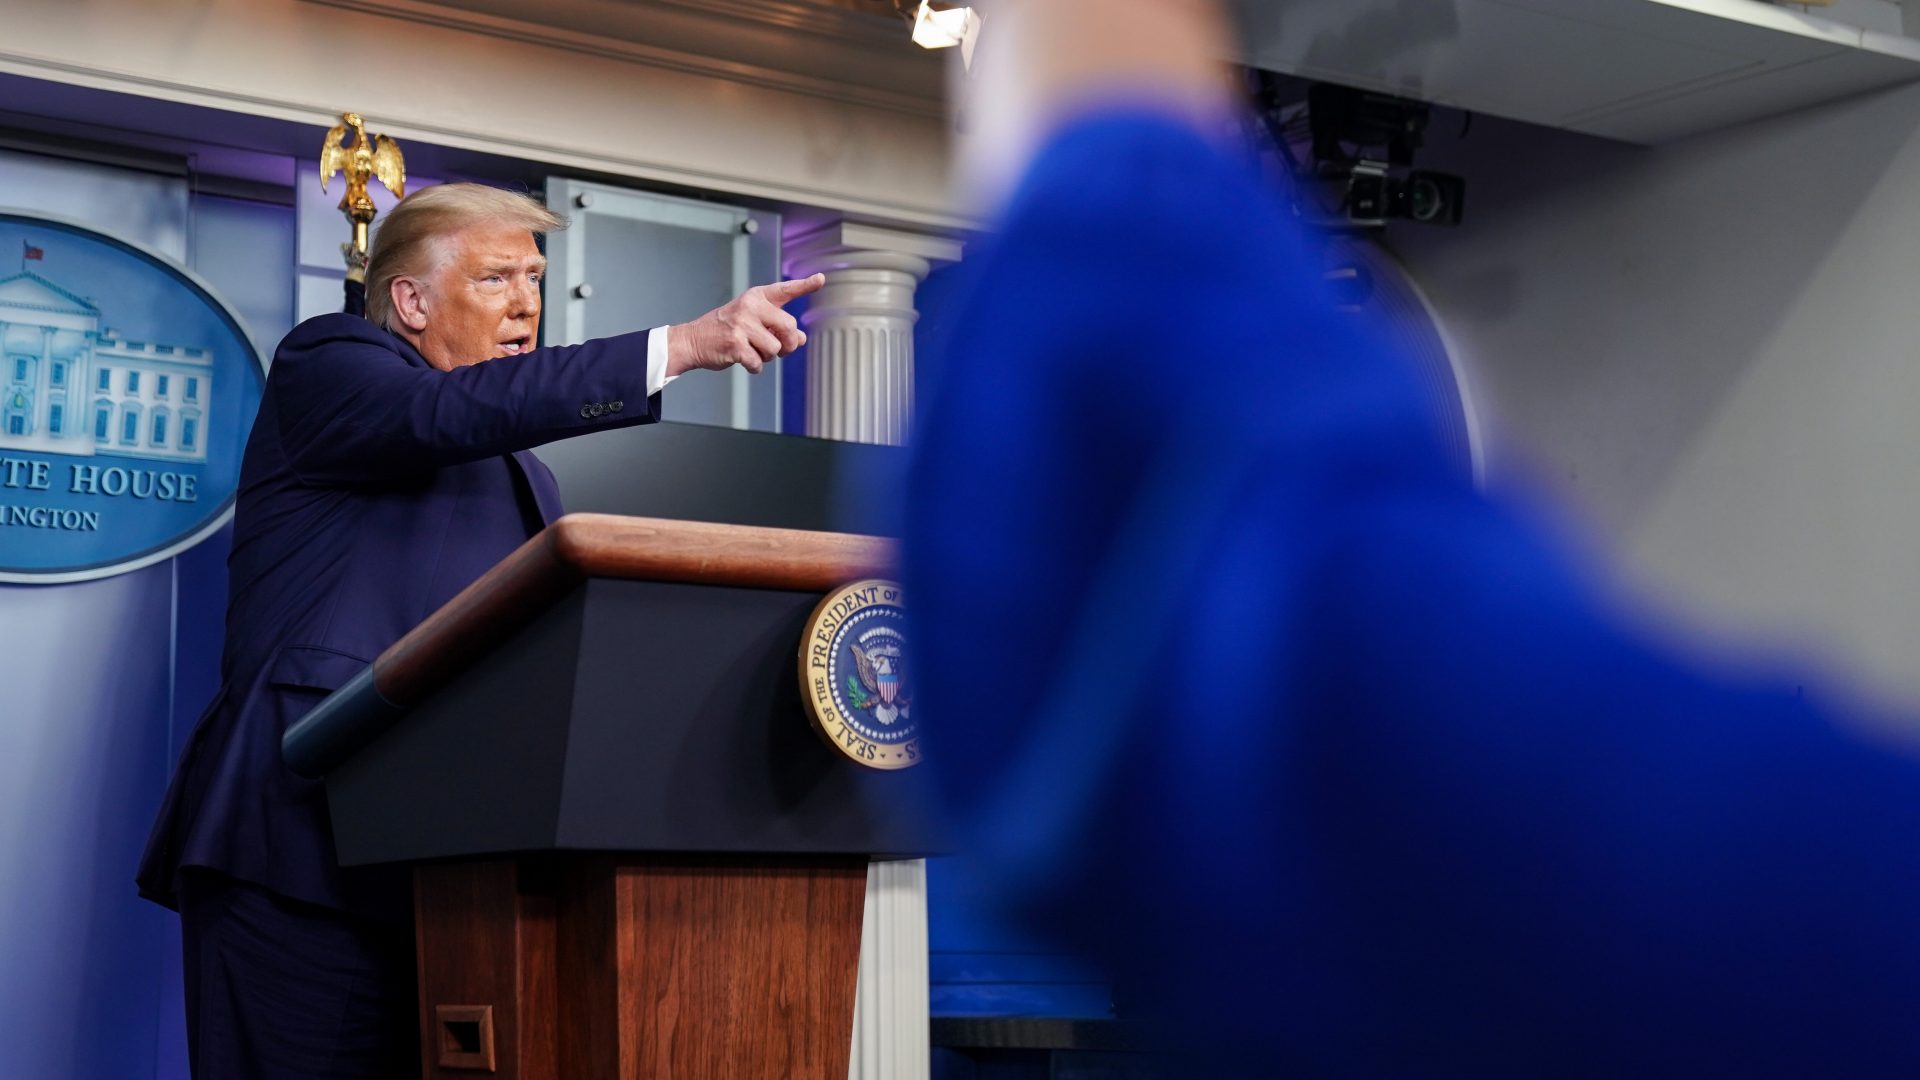 President Trump takes a question during a news conference at the White House on Sunday, where he dismissed reporting from the "New York Times" that he has paid little or no federal income taxes in recent years as "fake news."